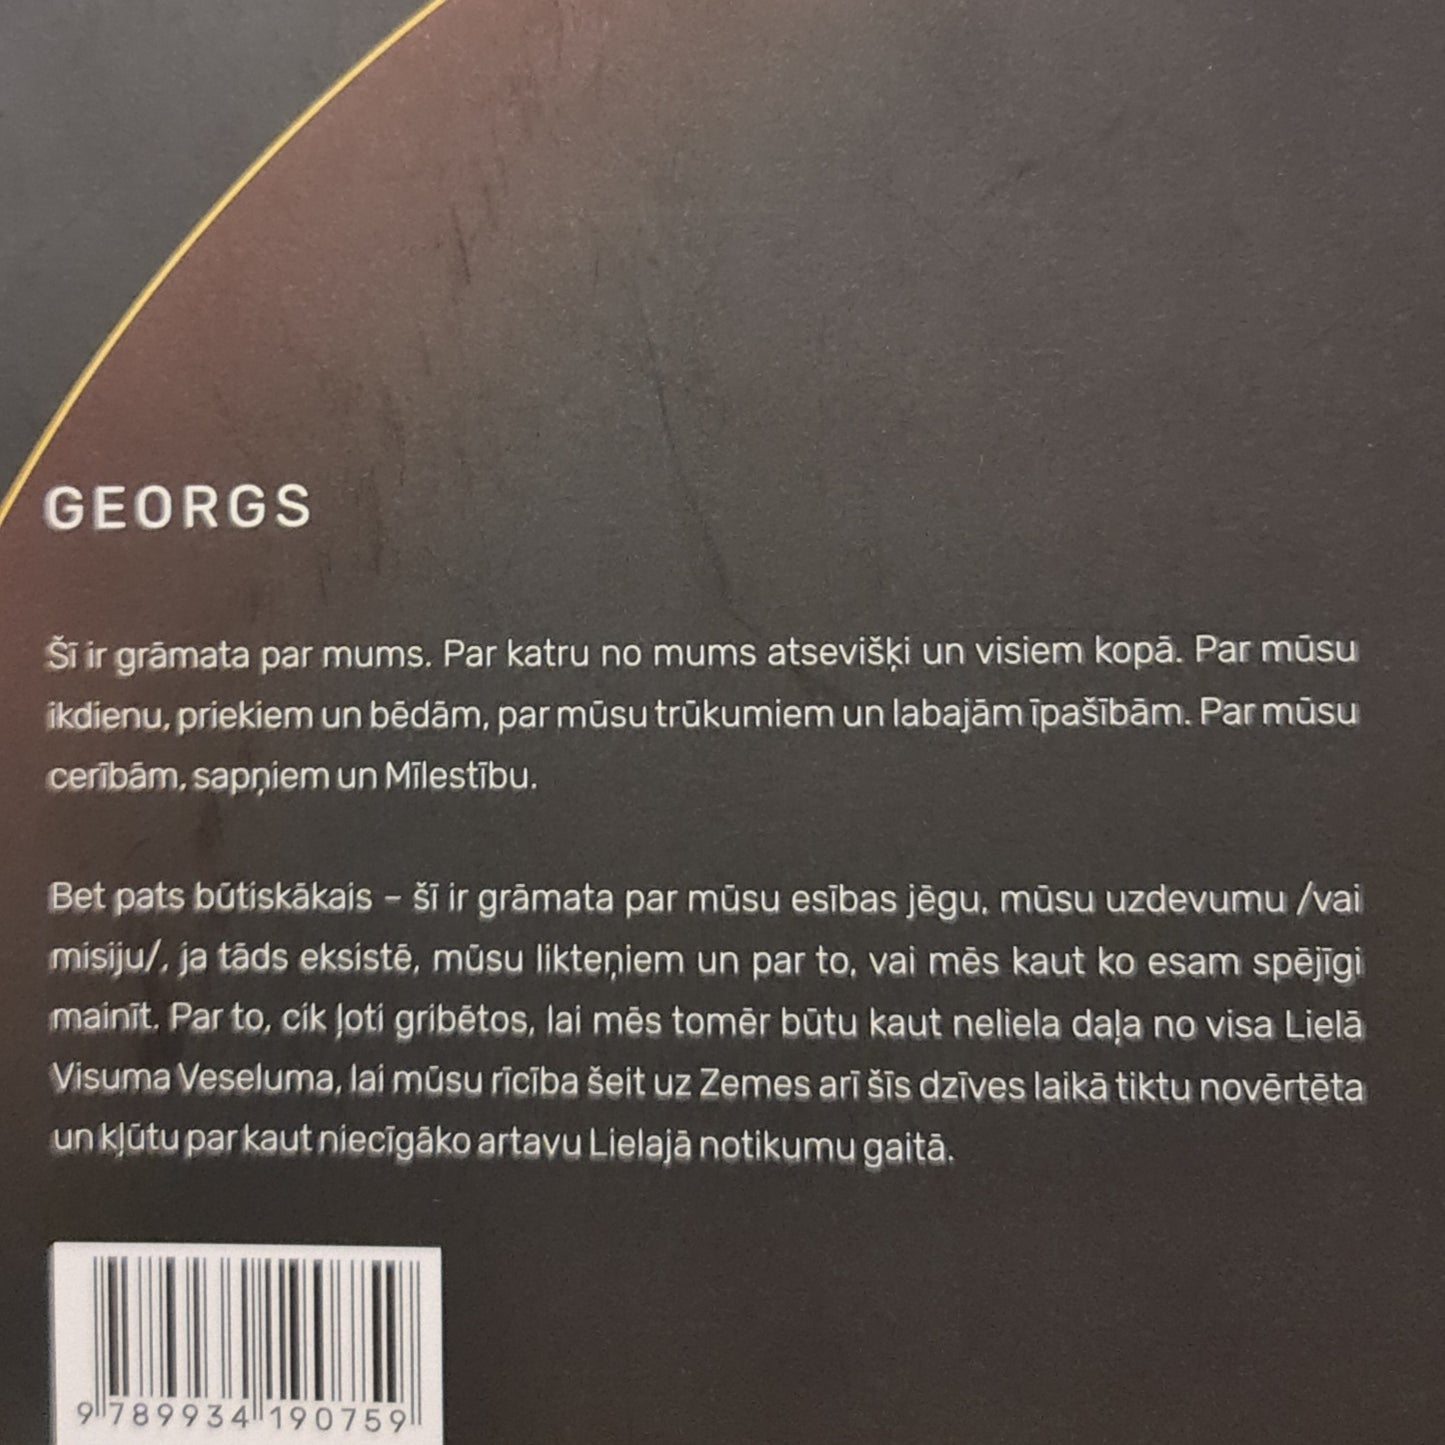 The book "Georg"